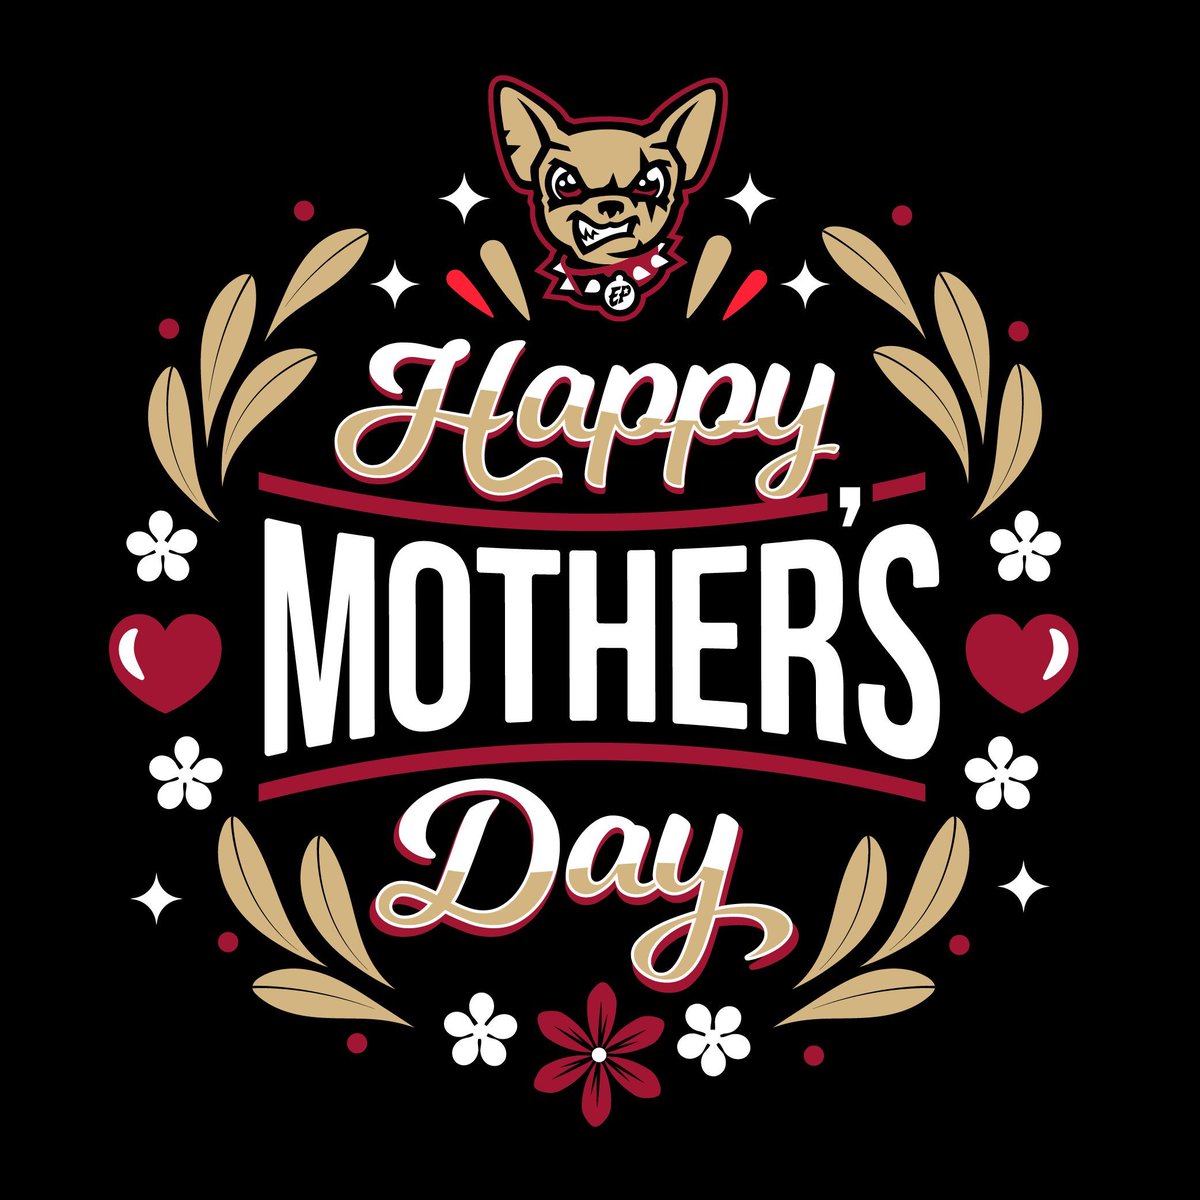 Here's to all the incredible Chihuahuas fans who double as amazing moms! Happy Mother's Day! May your day be filled with love, laughter, and a home run of happiness. Cheers to you, the MVPs of our hearts!